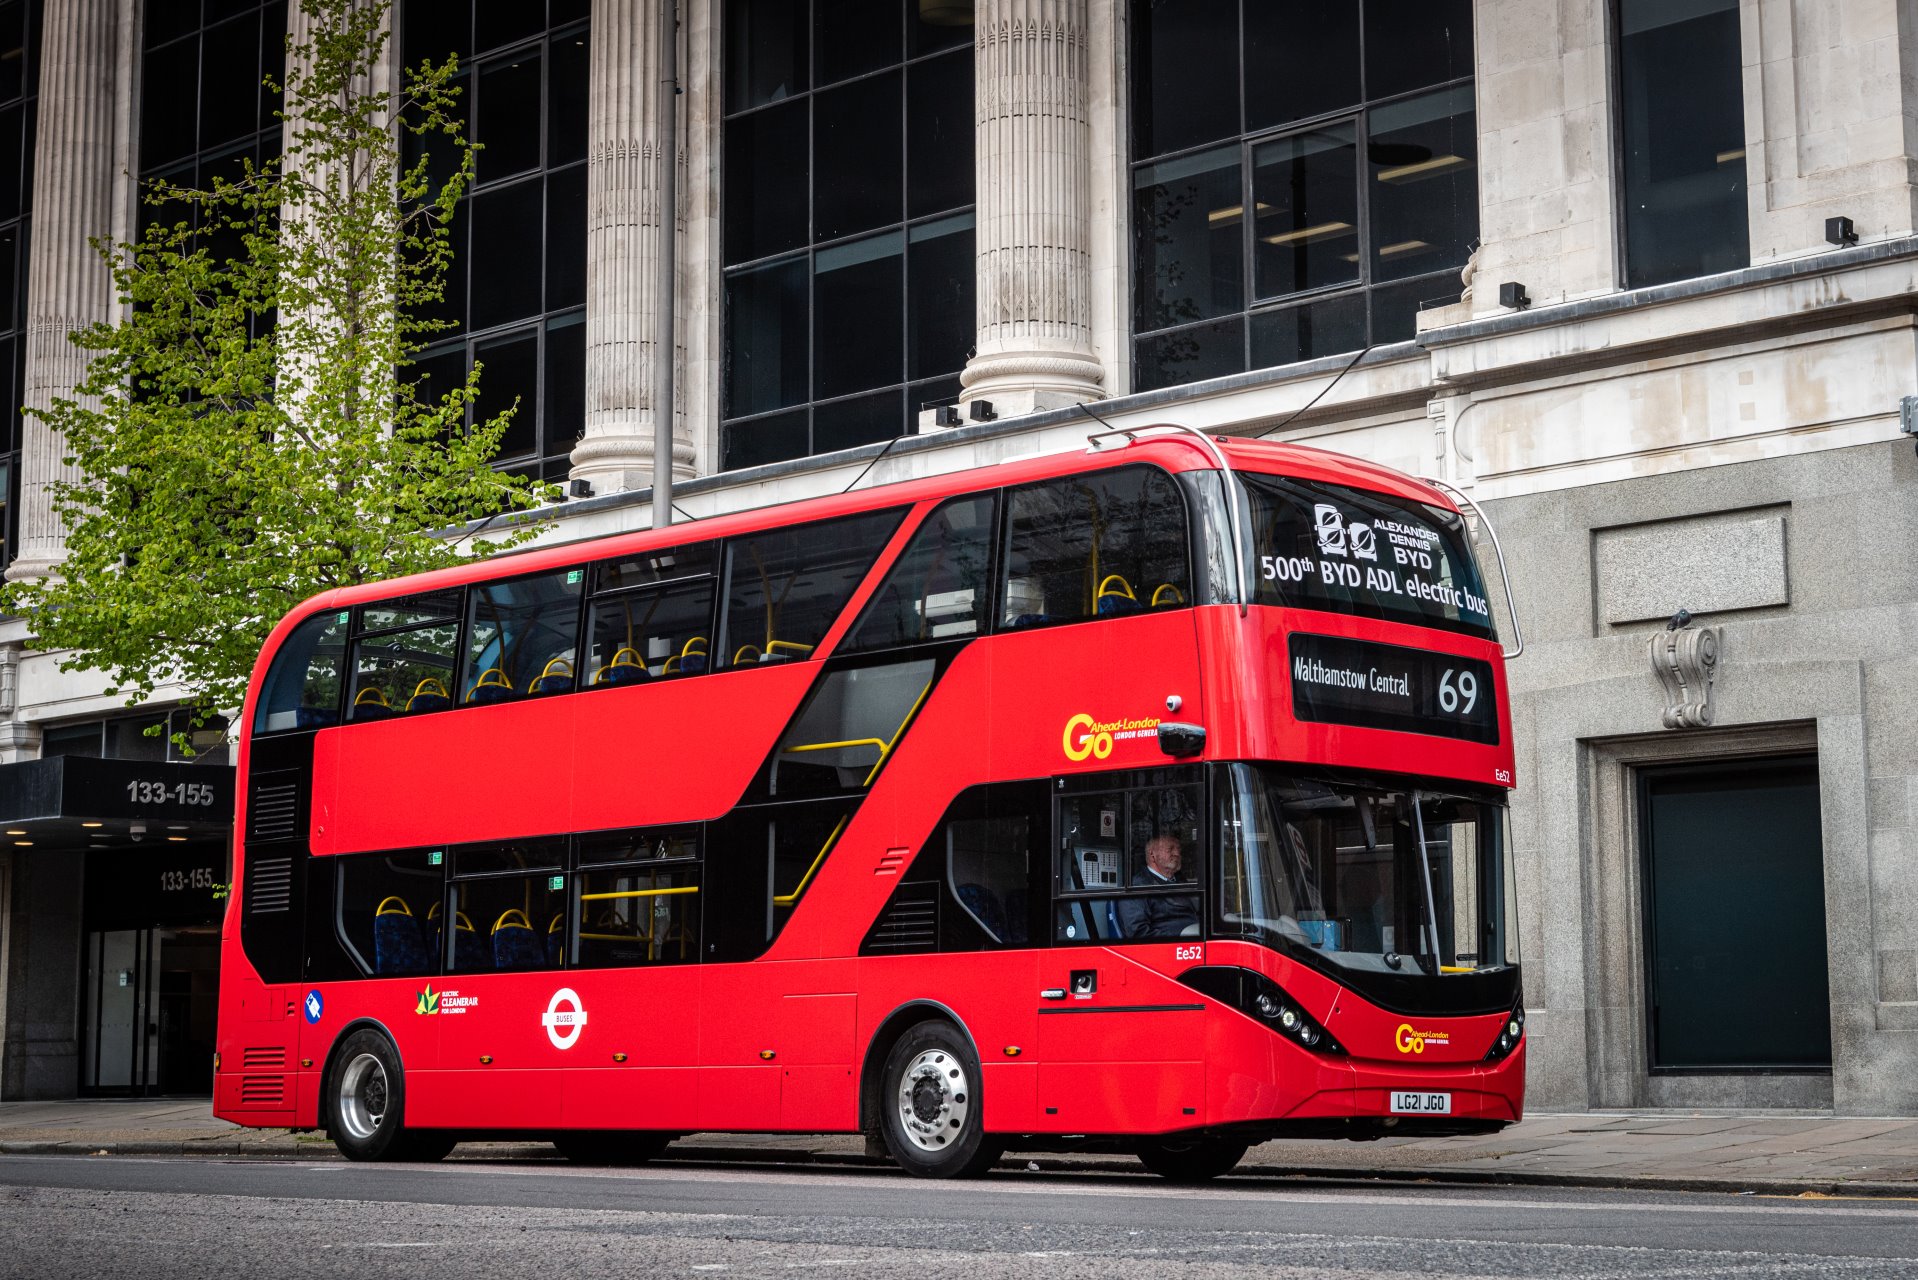 500th BYD ADL electric bus delivered to GoAhead London as orders top